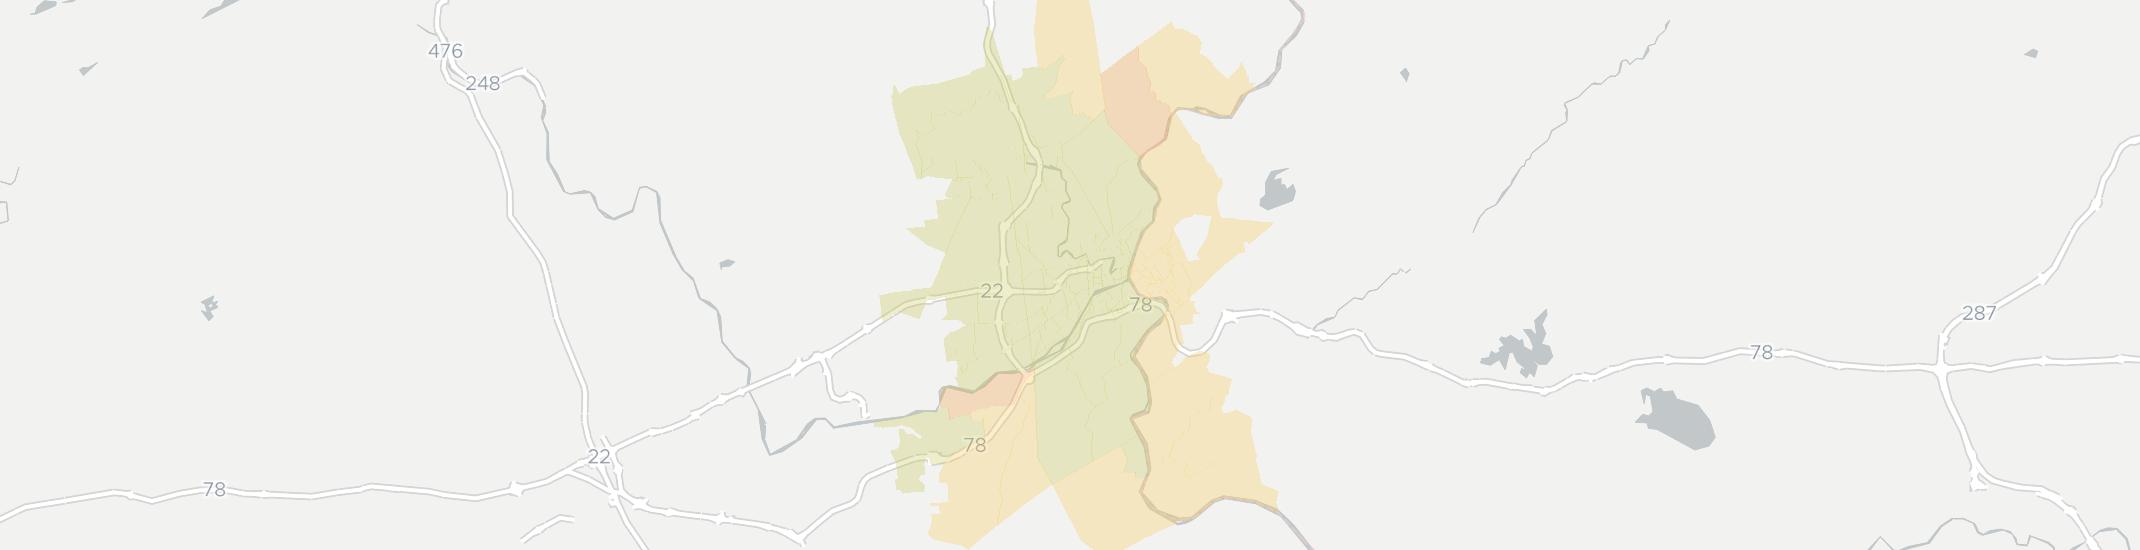 Easton Internet Competition Map. Click for interactive map.